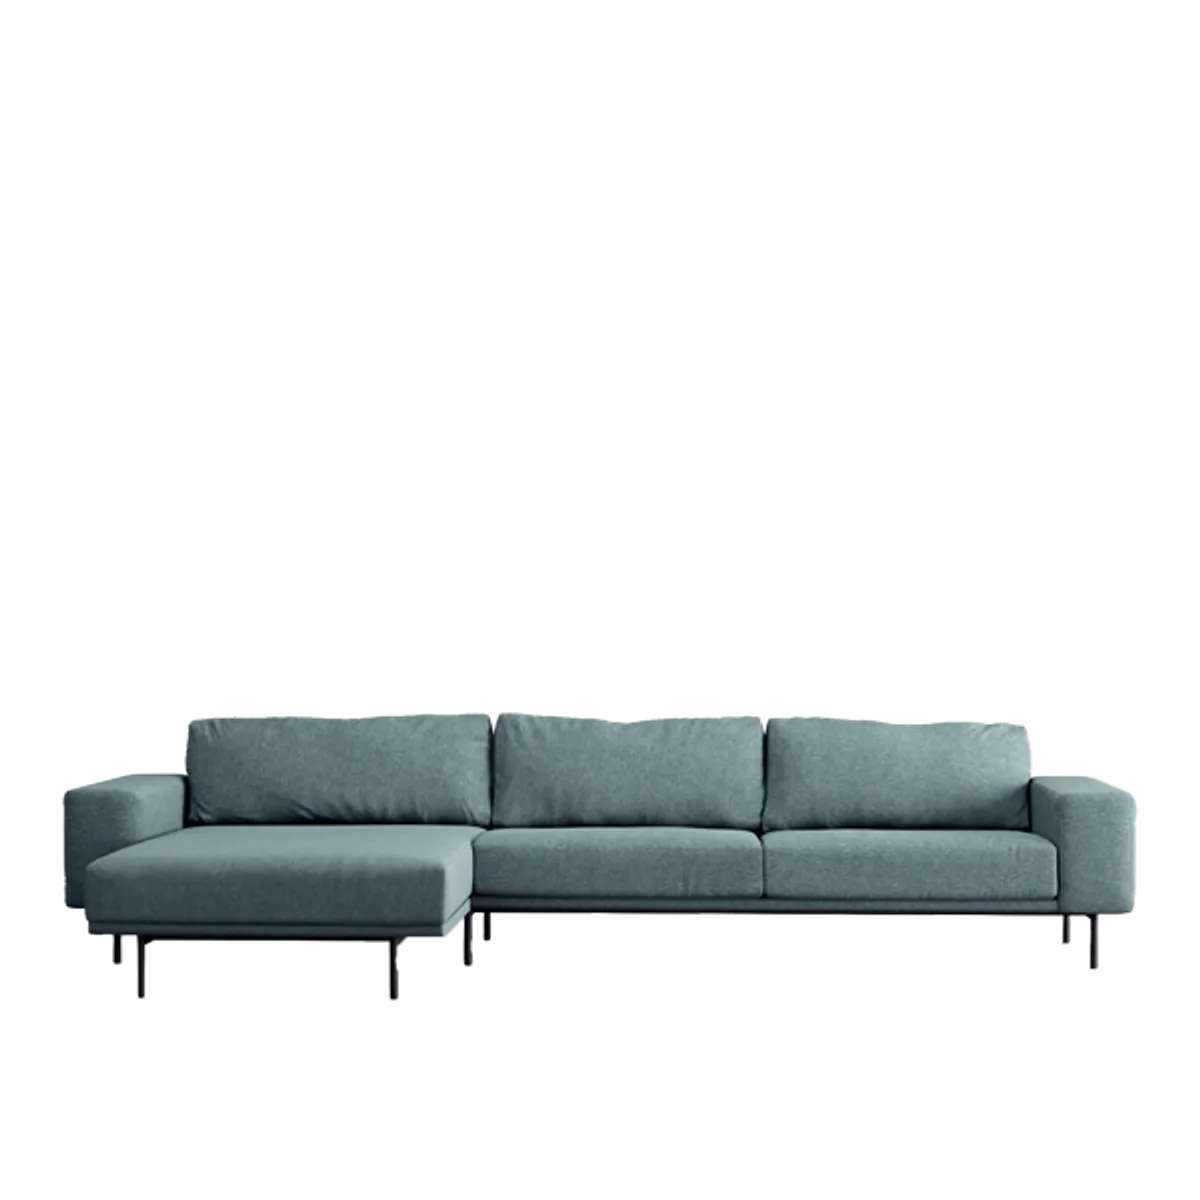 Genera modular sofa Inside Out Contracts